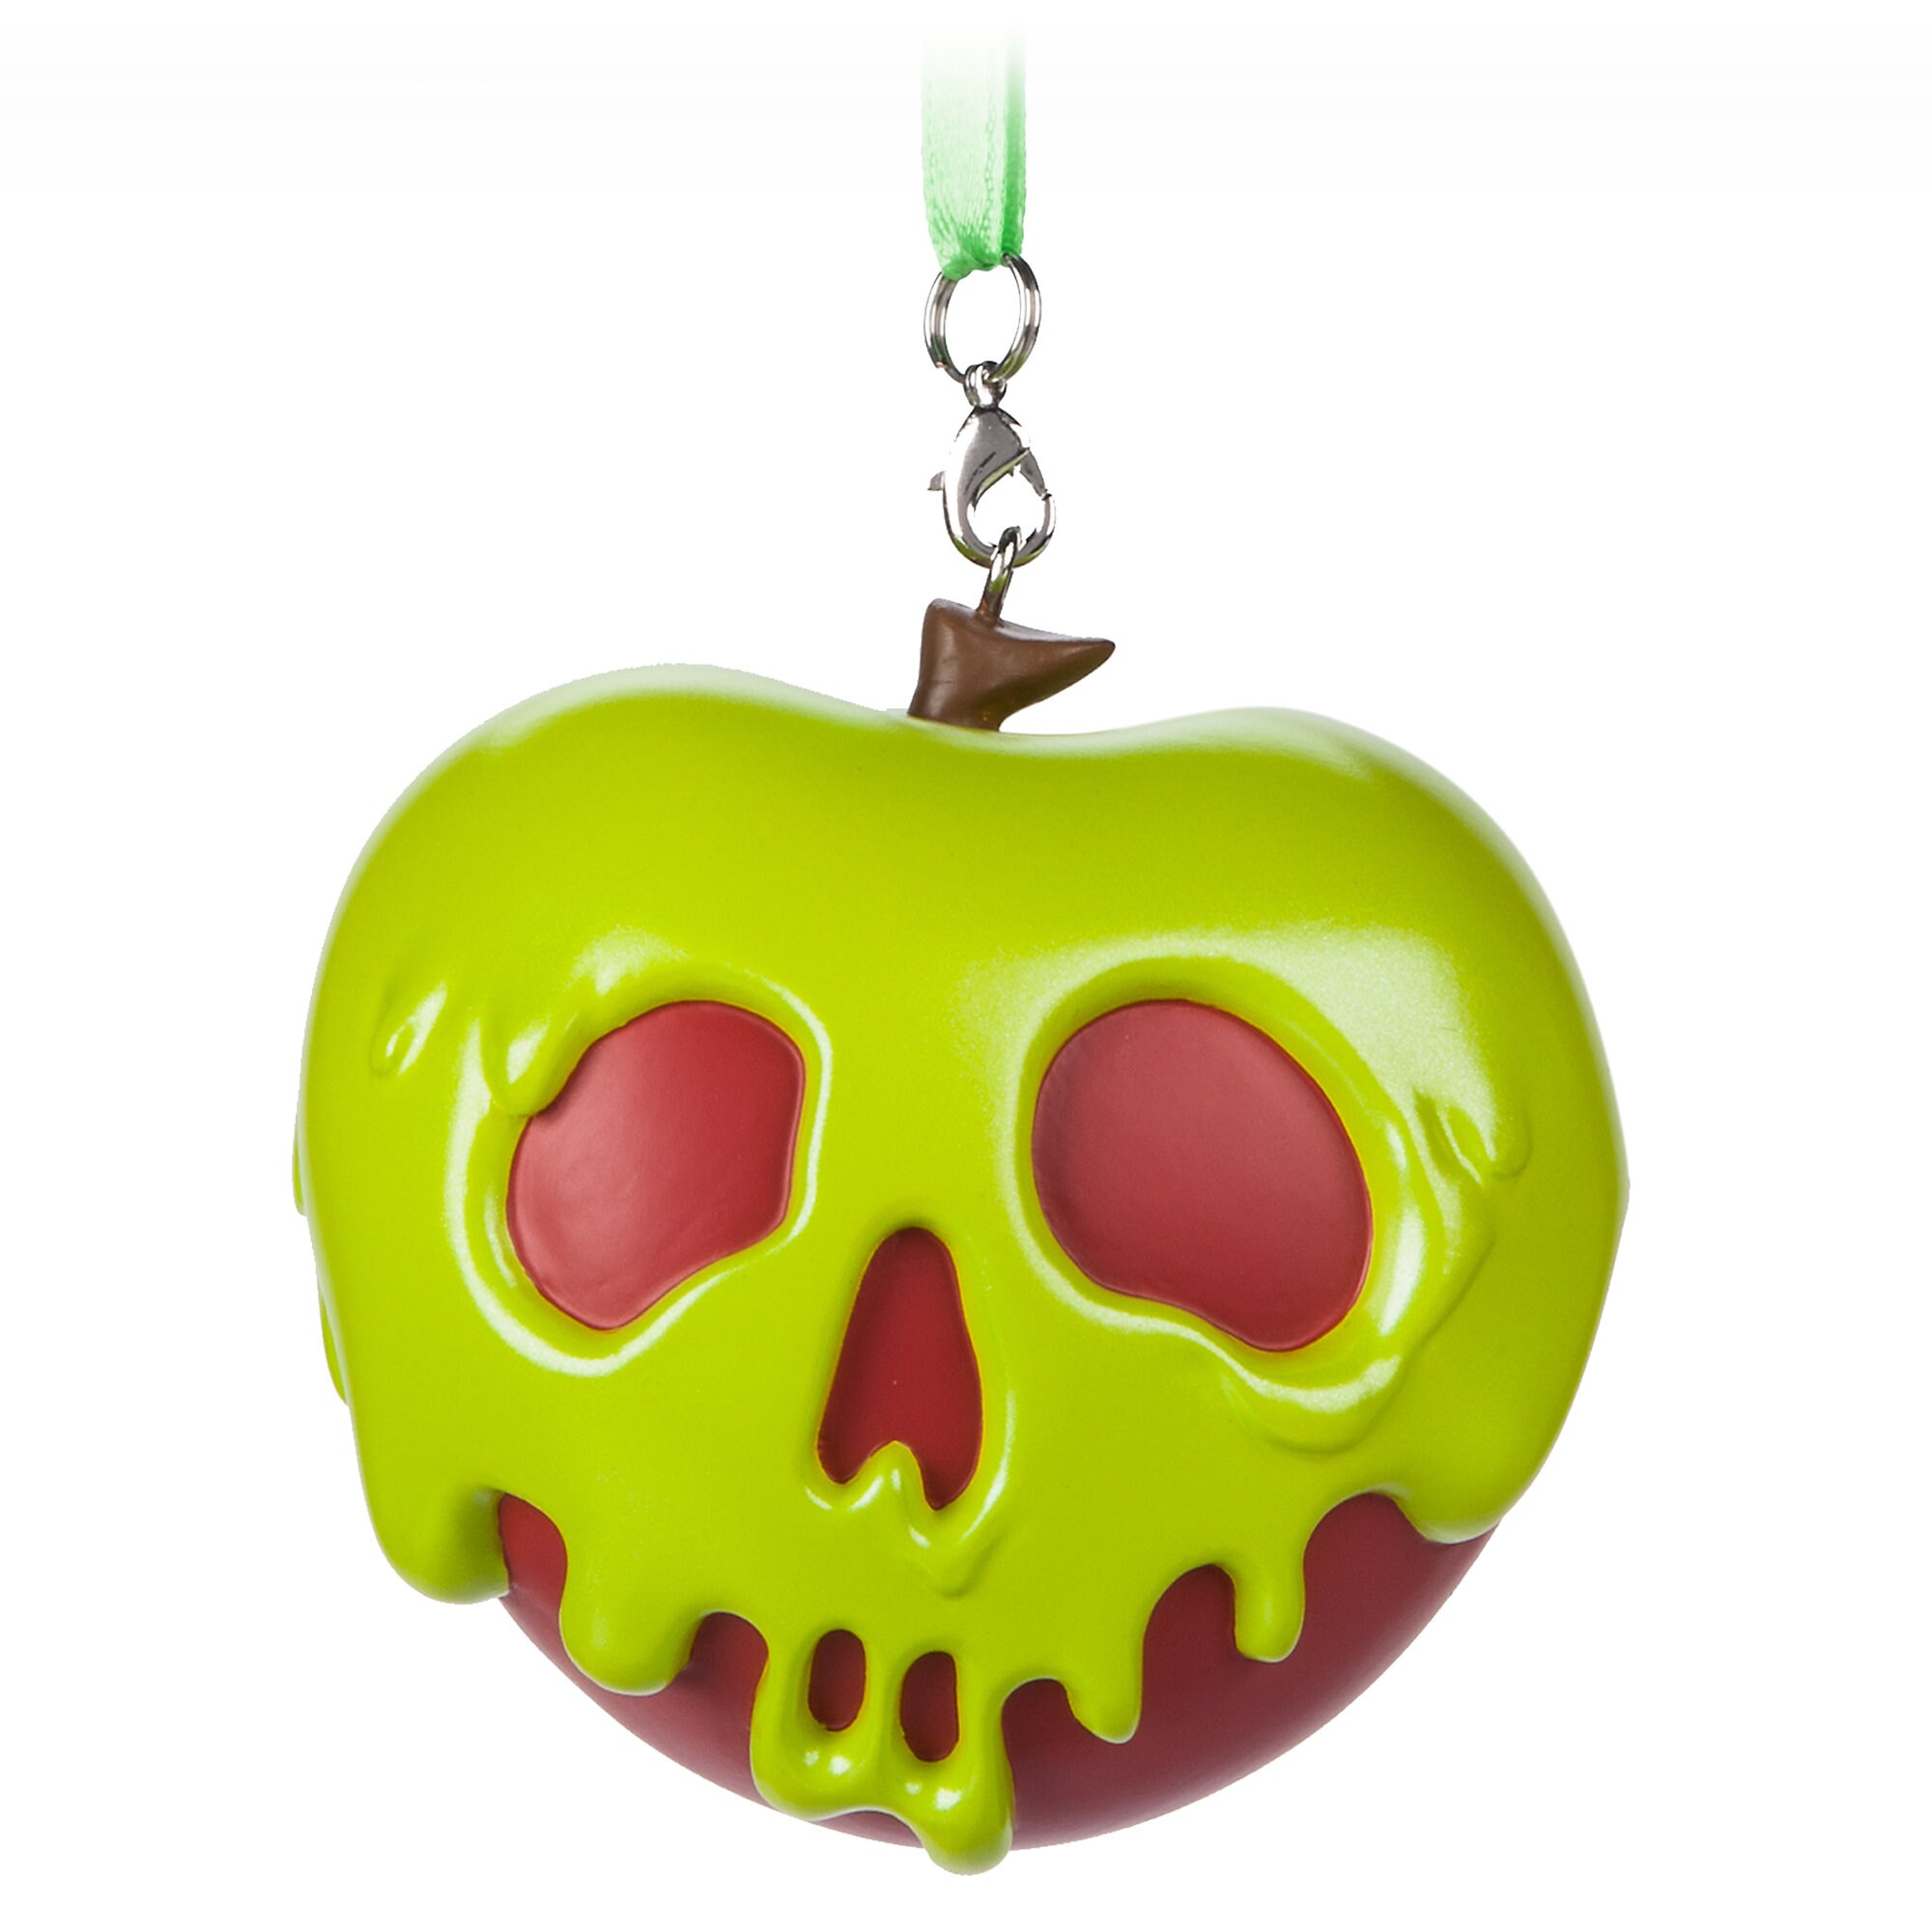 Poisoned Apple Ornament - Snow White and the Seven Dwarfs